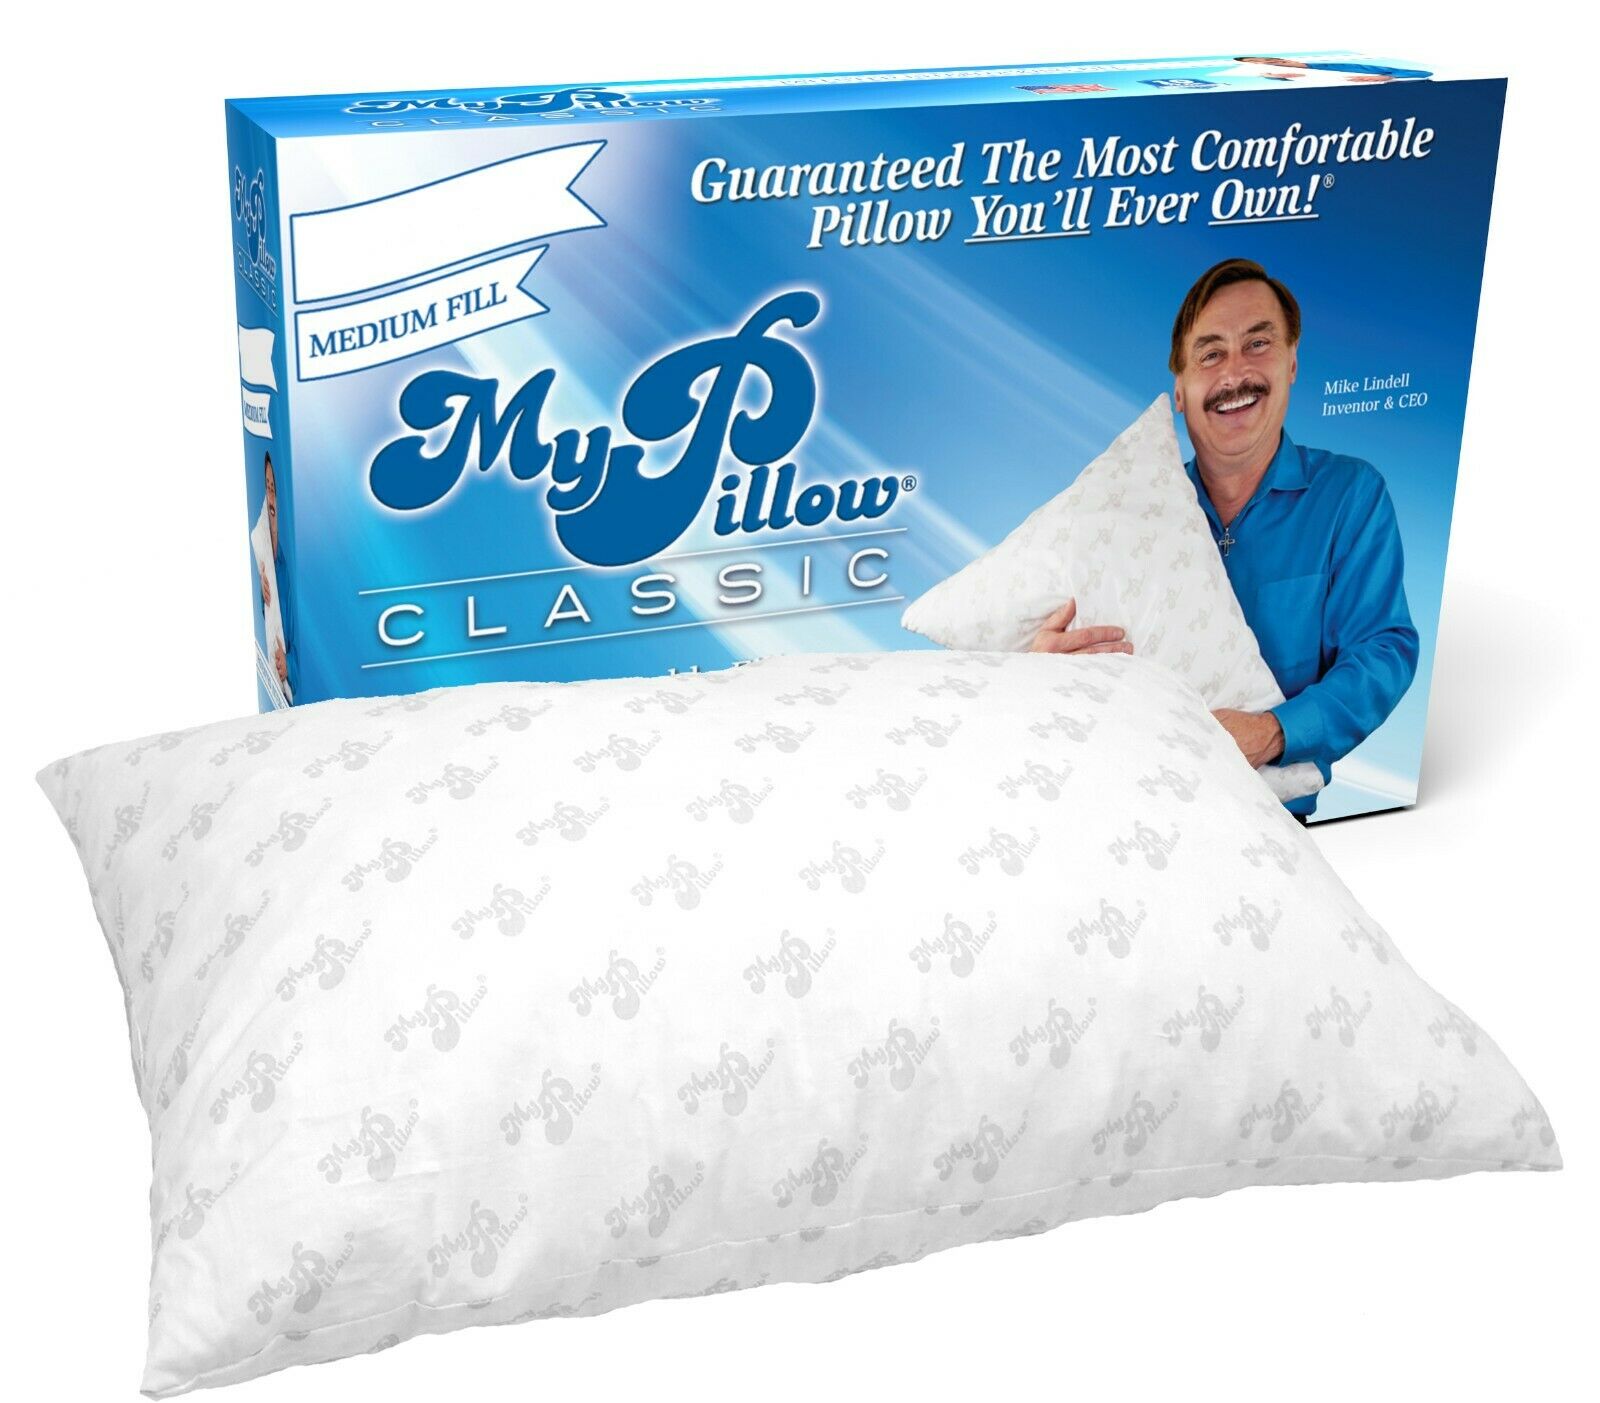 My Pillow Classic Series Bed Pillow